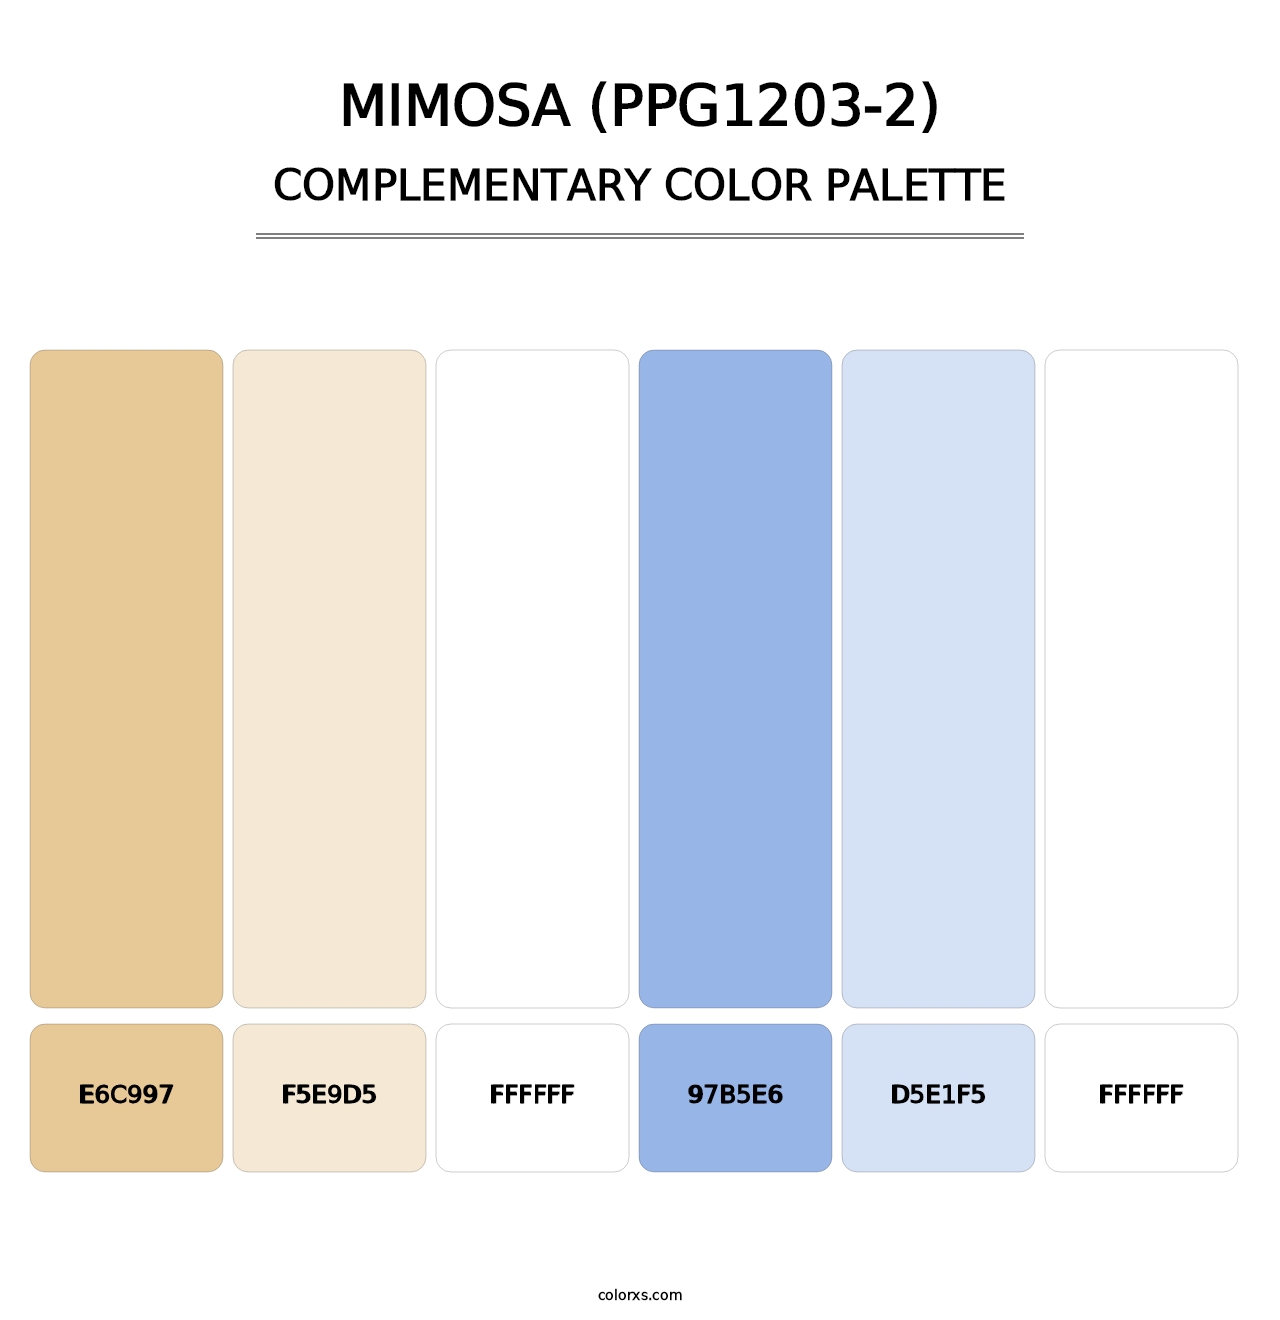 Mimosa (PPG1203-2) - Complementary Color Palette